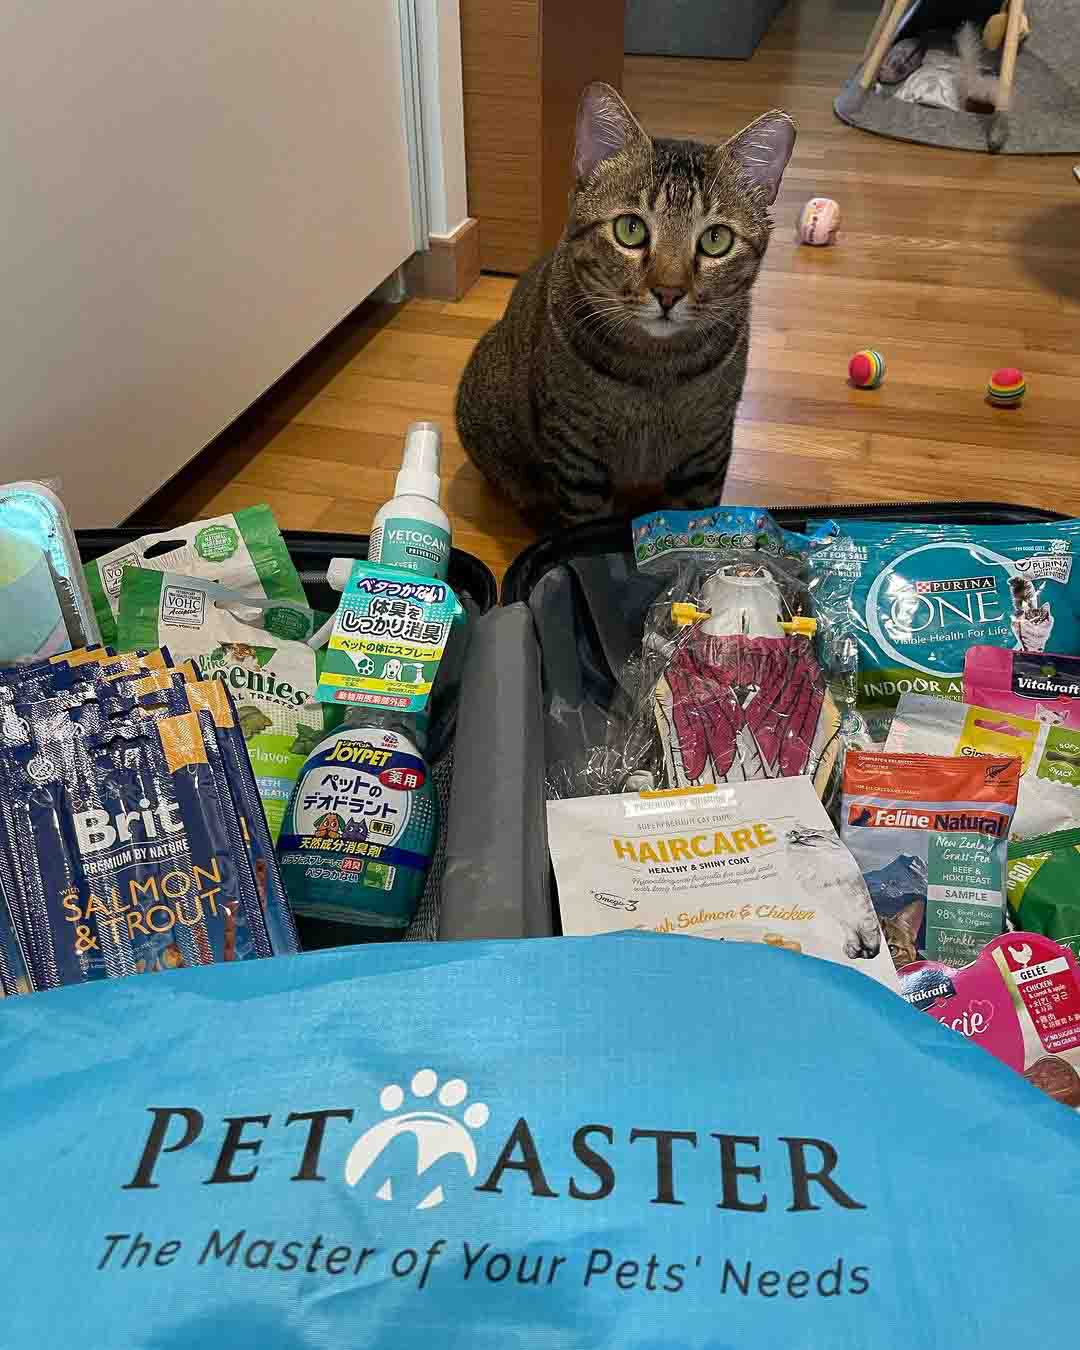 Petmaster by Catsmart Discount Madness photo